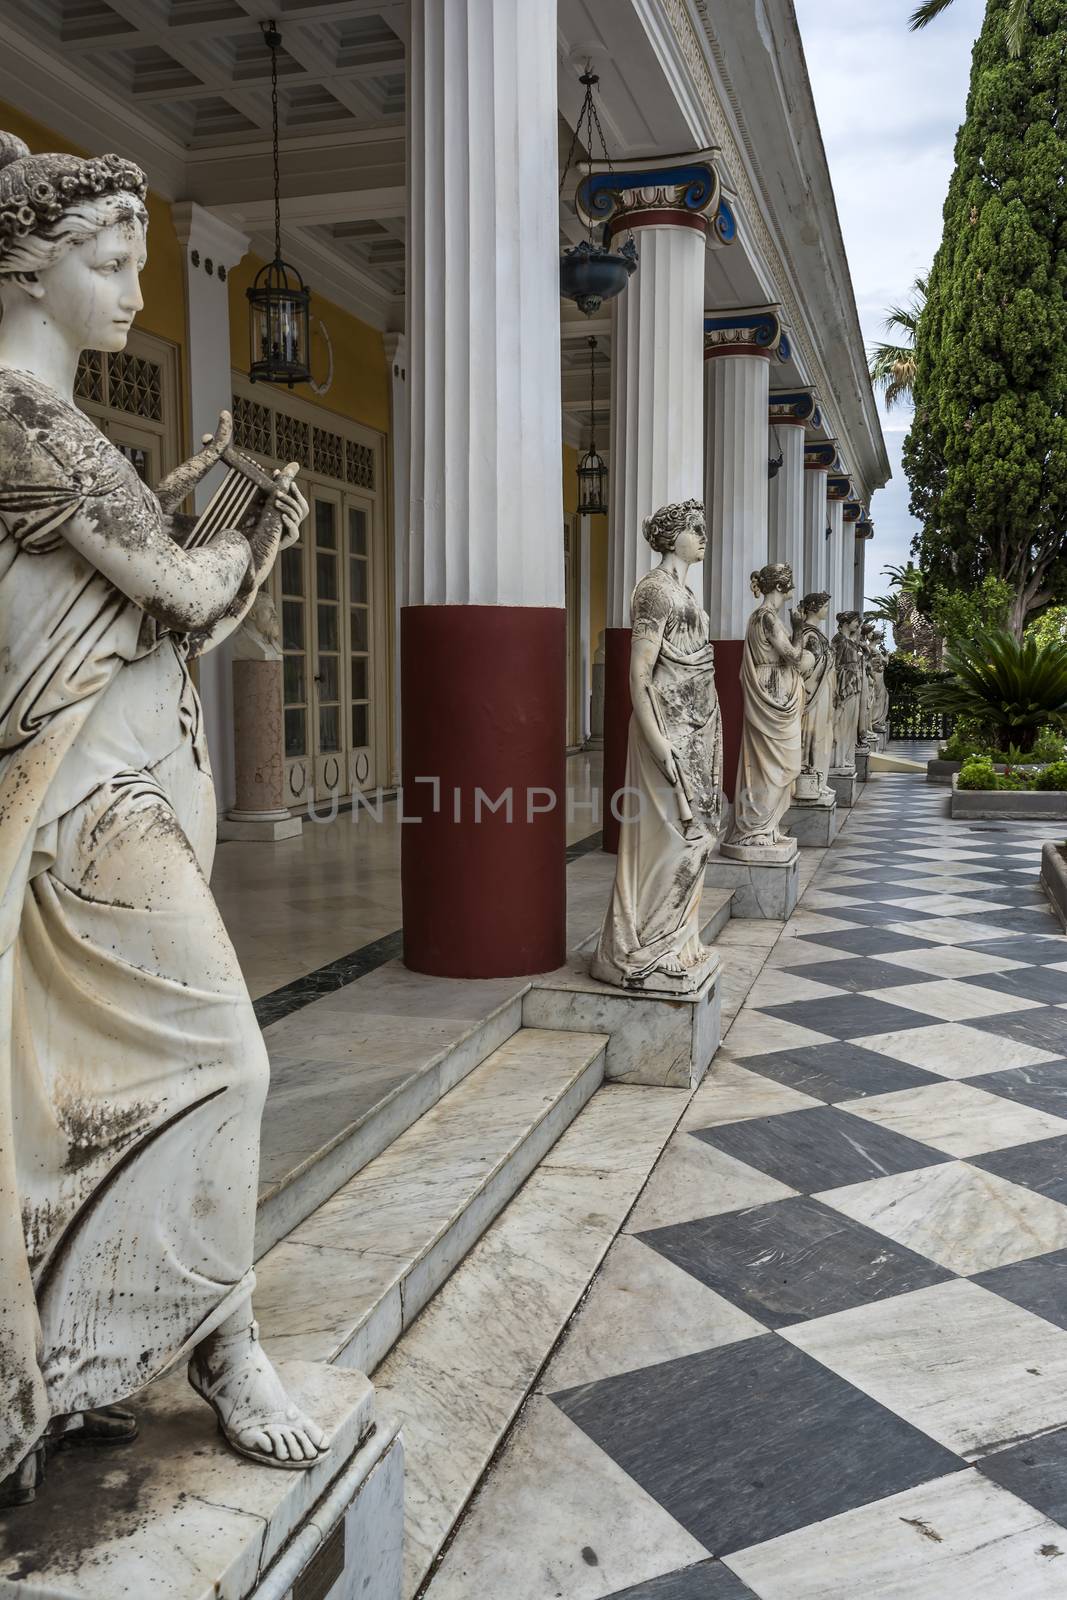 Achilleion palace, Corfu, Greece - August 24, 2018: Statues of the nine muses at Achilleion Palace, island of Corfu. Achilleion was built by Empress Elisabeth of Austria, known as Sissi.